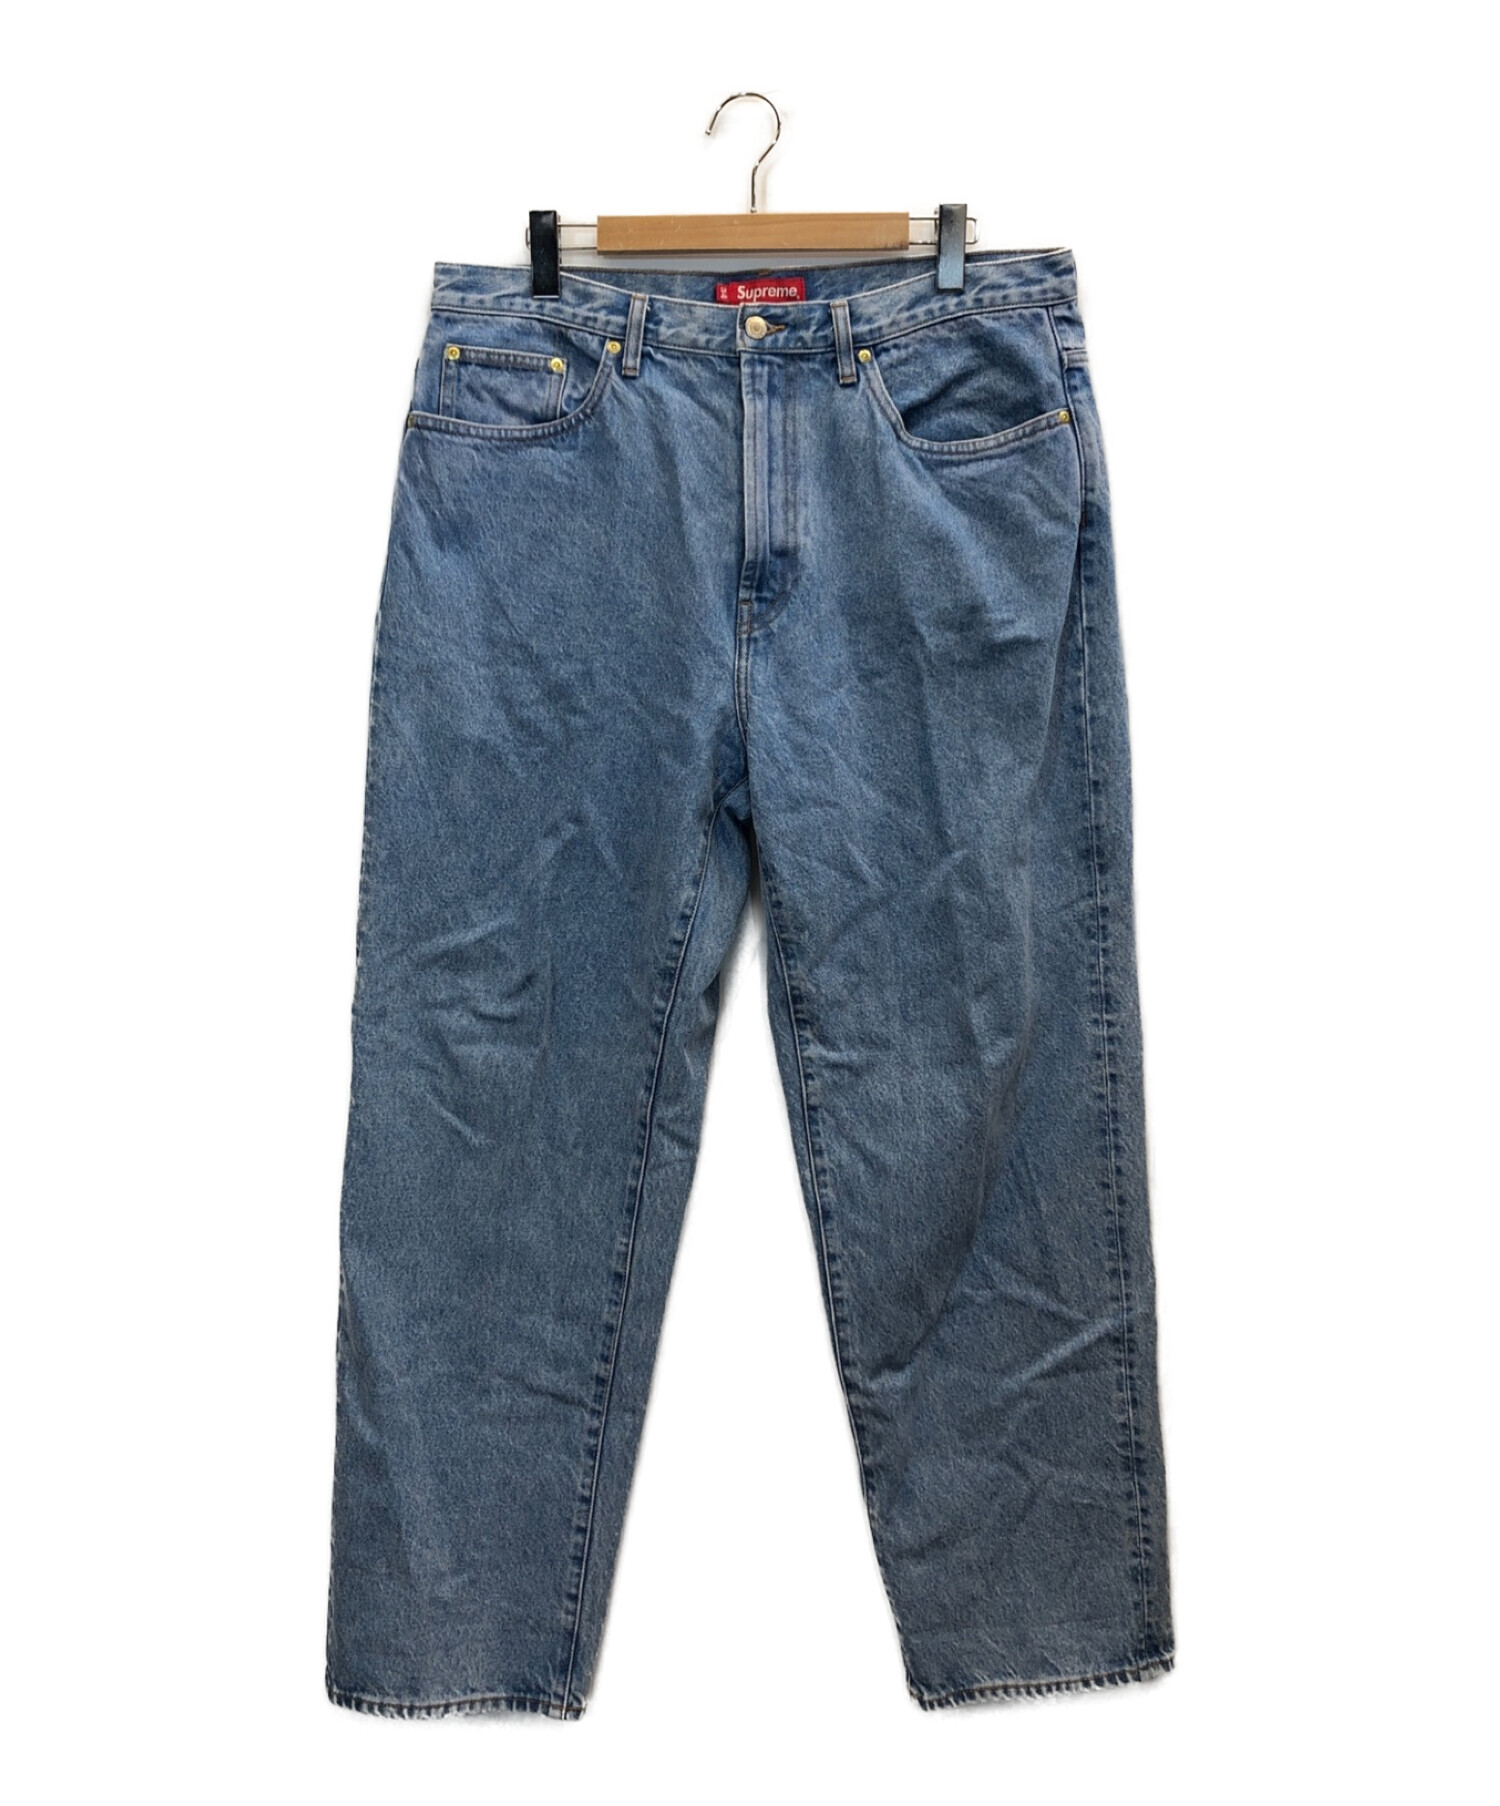 Supreme Baggy Jean Washed Blue W34 22AW